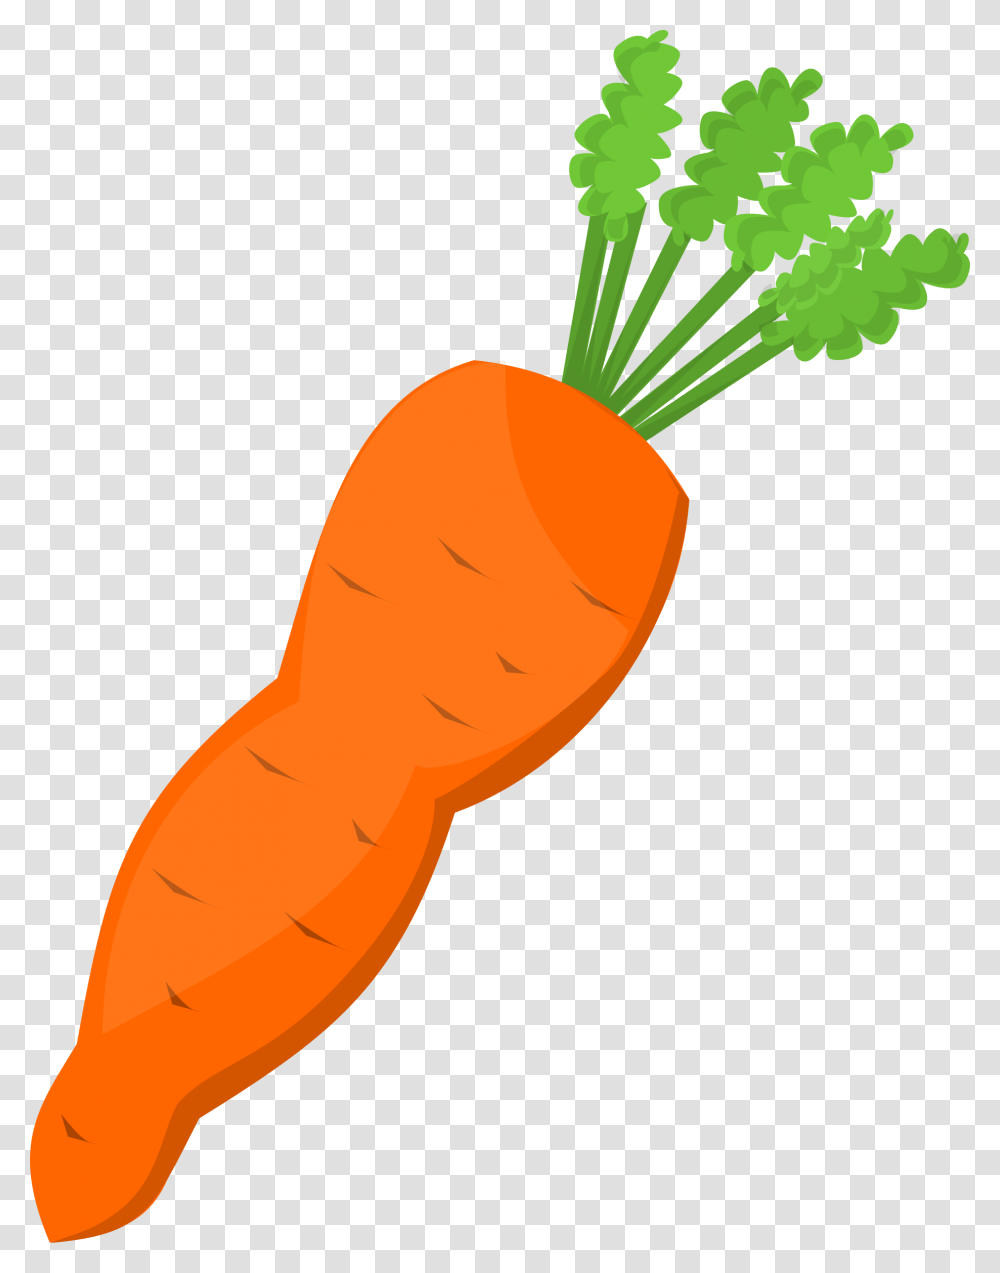 Machovka Carrot Clipart Carrot Cartoon Free, Plant, Vegetable, Food Transparent Png